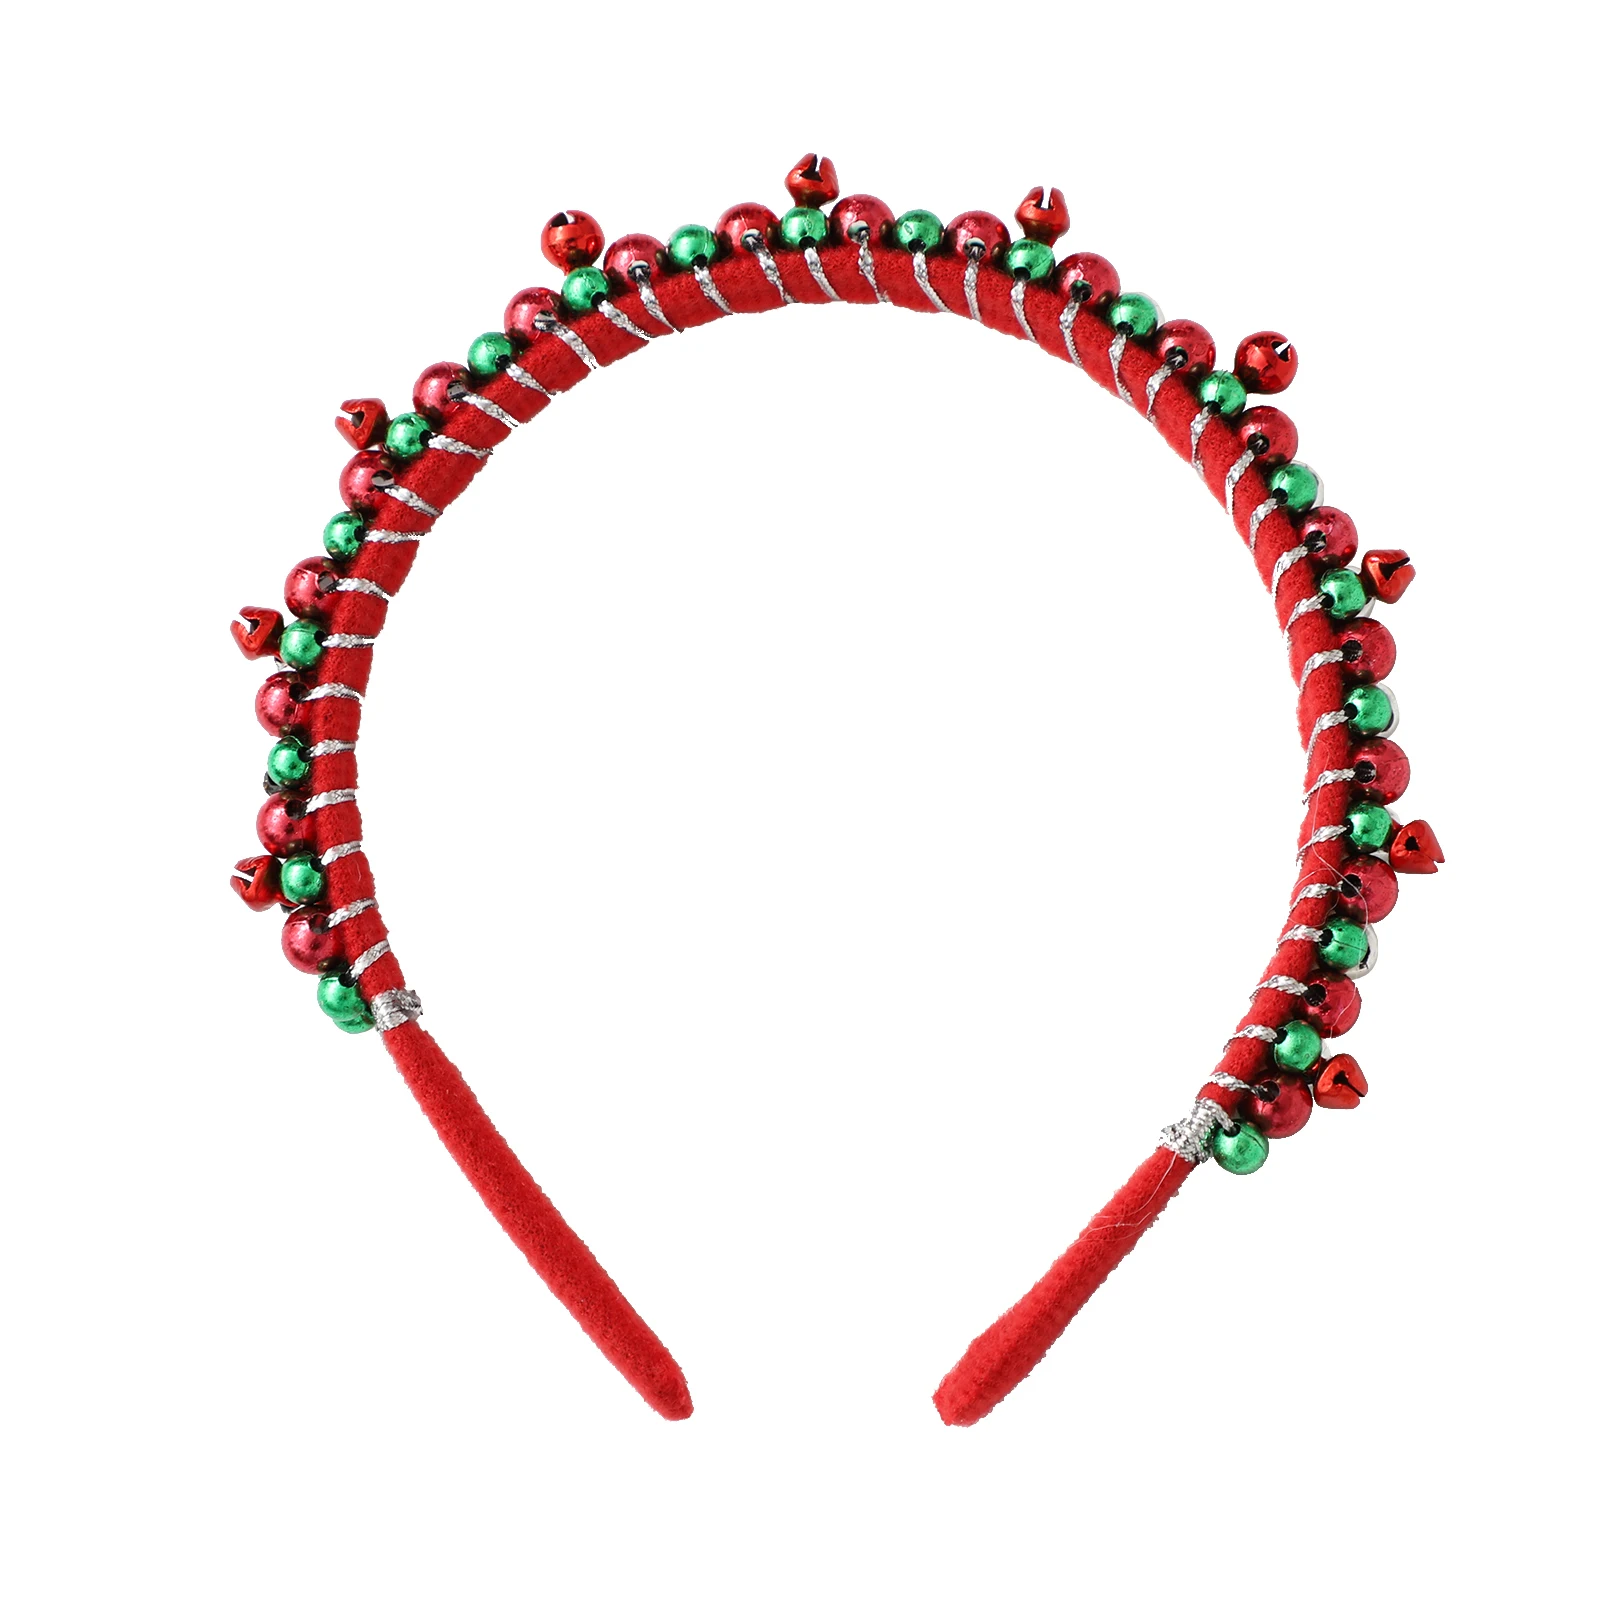 Christmas Jingle Bells Headwear Bell Headband Red Green Plastic Beads Adults Kids Xmas Festival Party Cosplay Hair Accessories